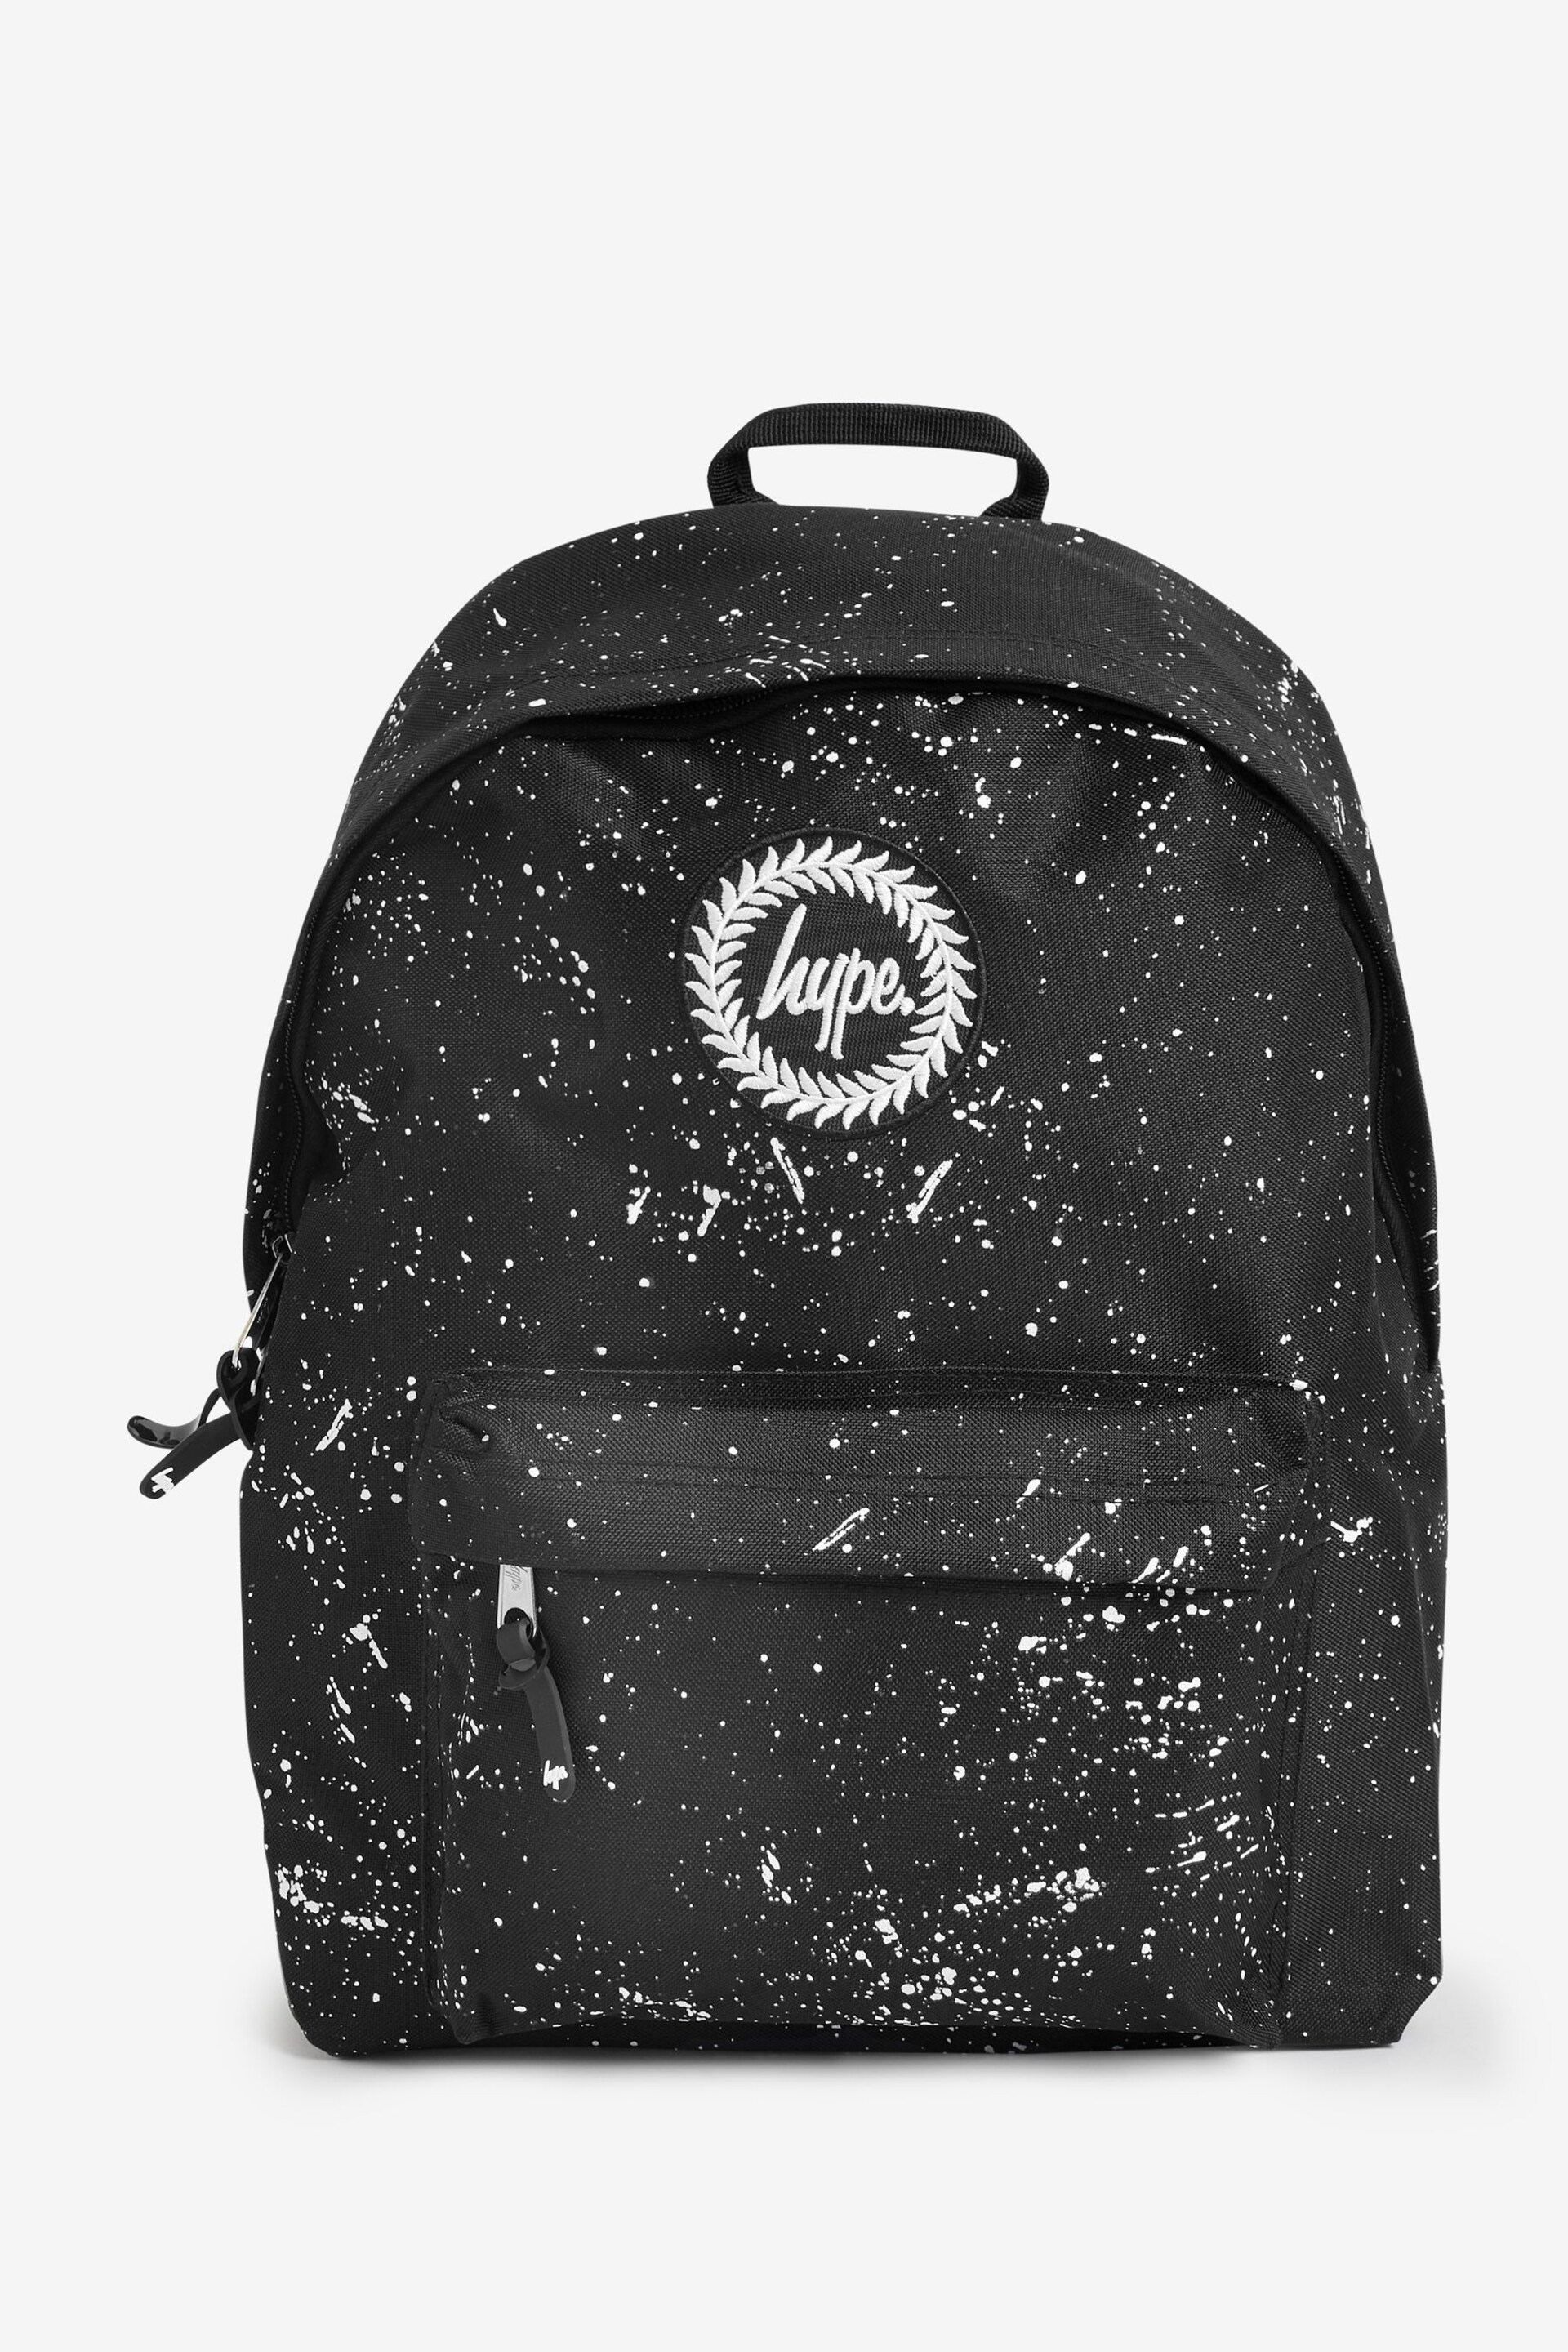 Hype. Black With White Speckle Backpack - Image 1 of 3